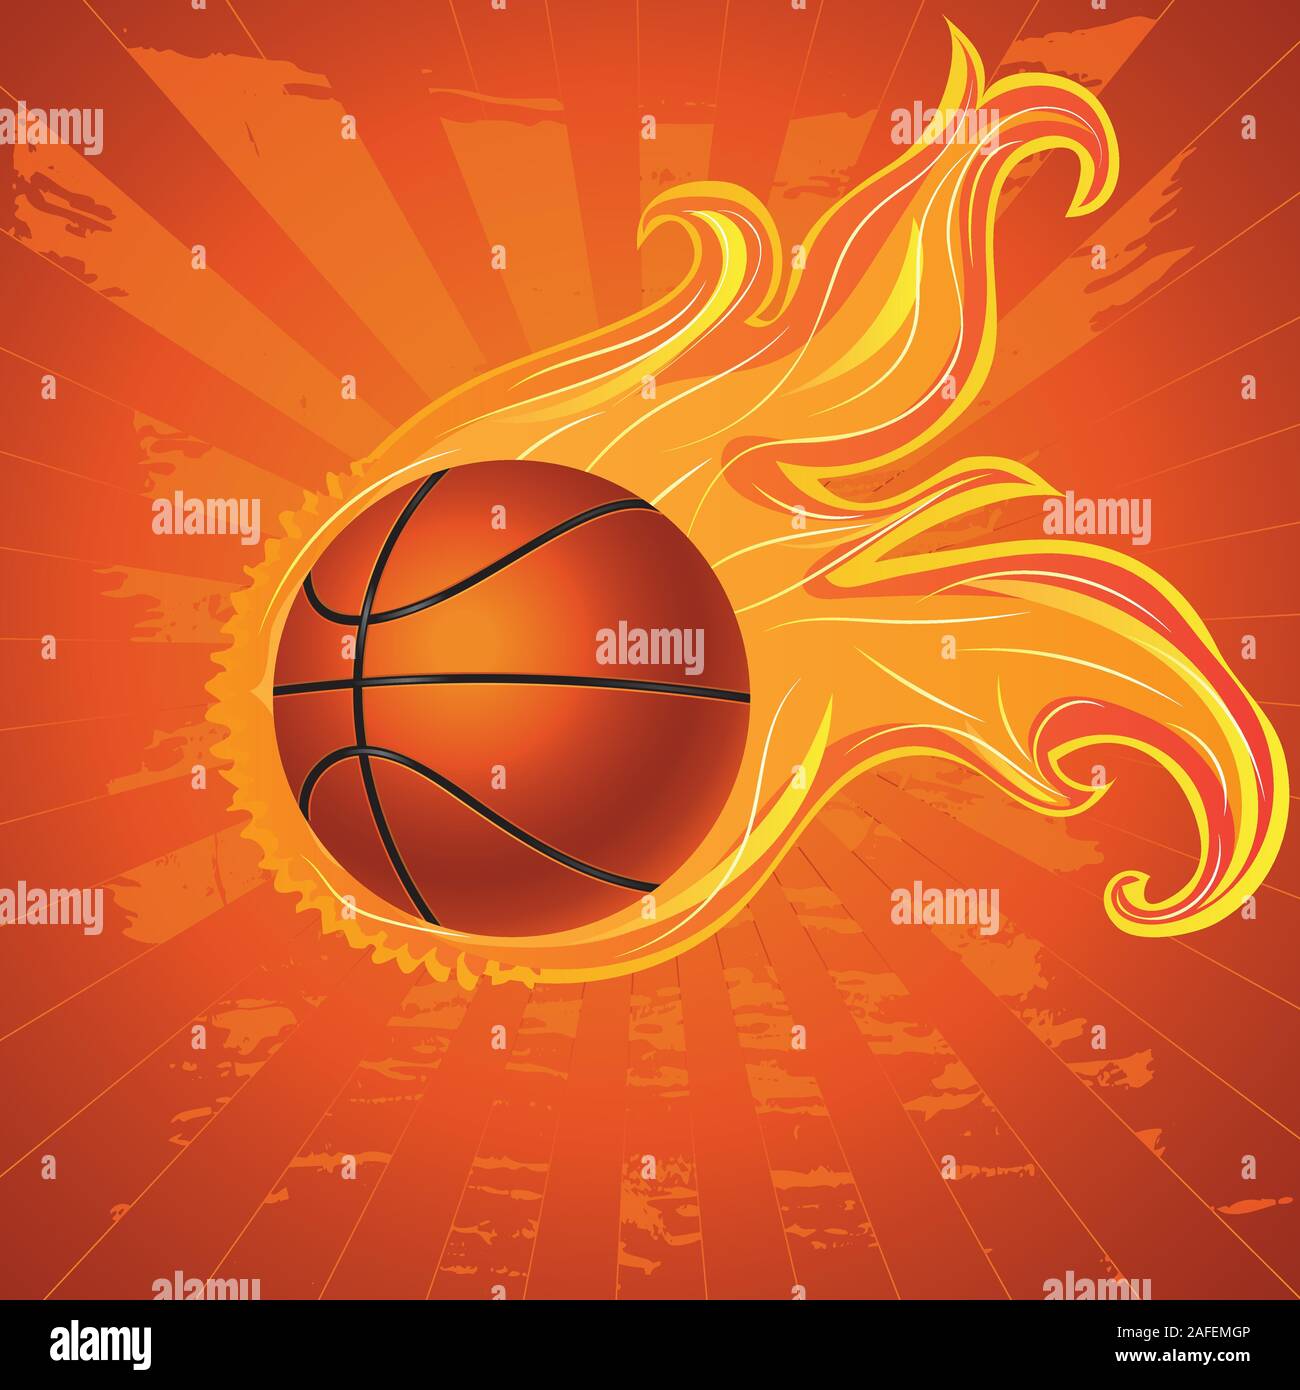 Grunge orange background with basketball ball and flame. Stock Vector